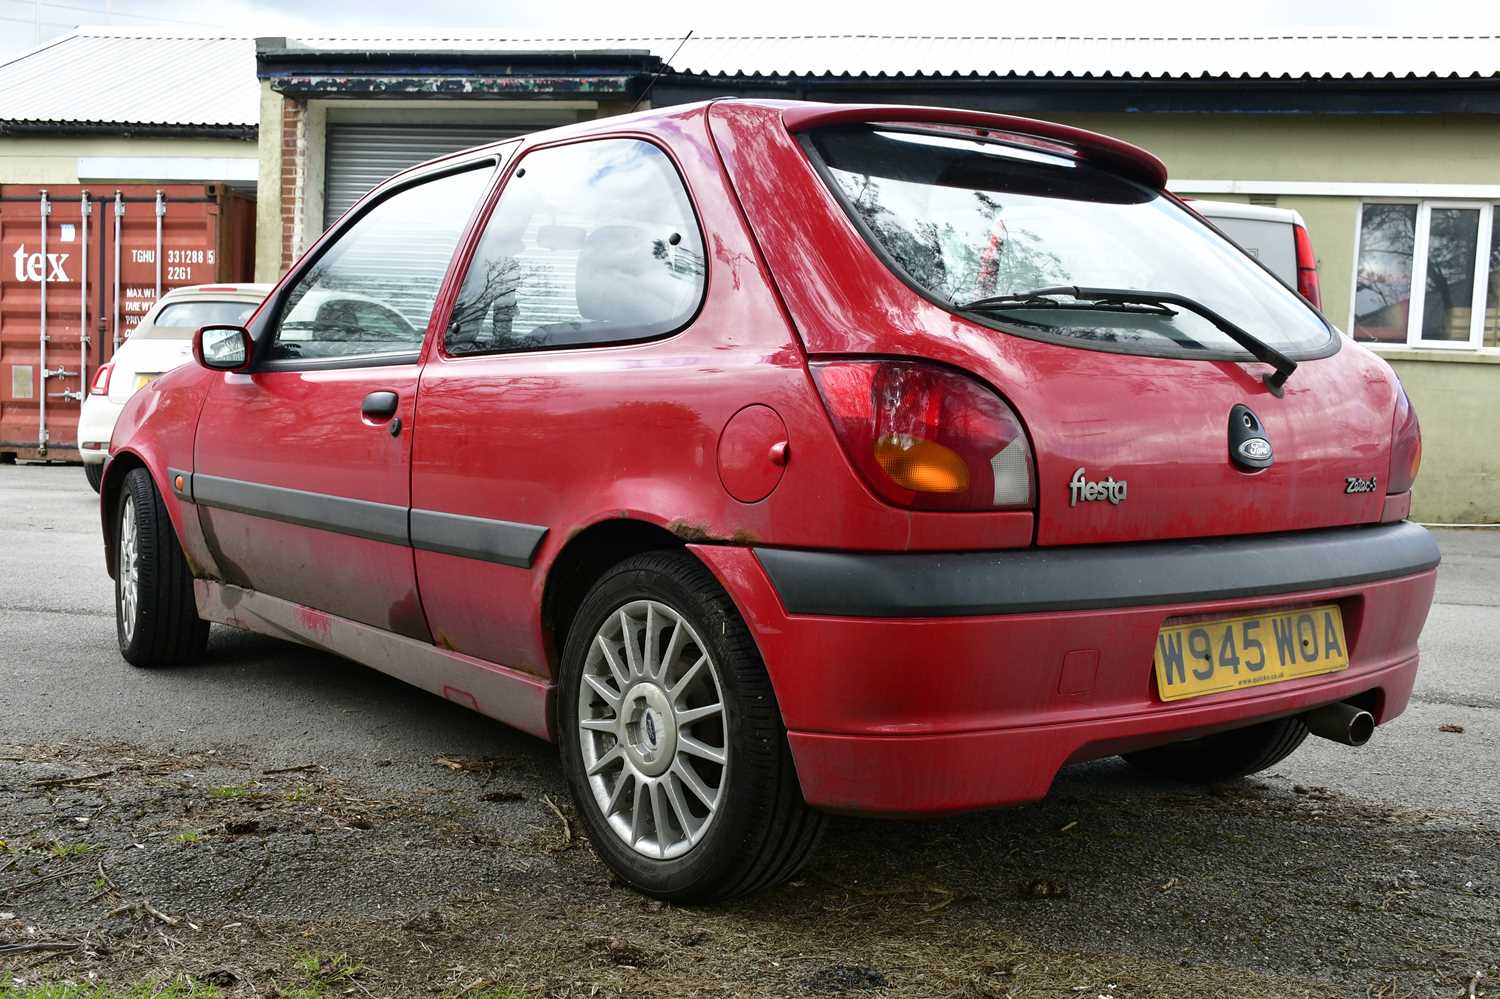 A Ford Fiesta, red, W945 WOA, complete with one key, with V5, service history and log book and MOT - Image 5 of 9